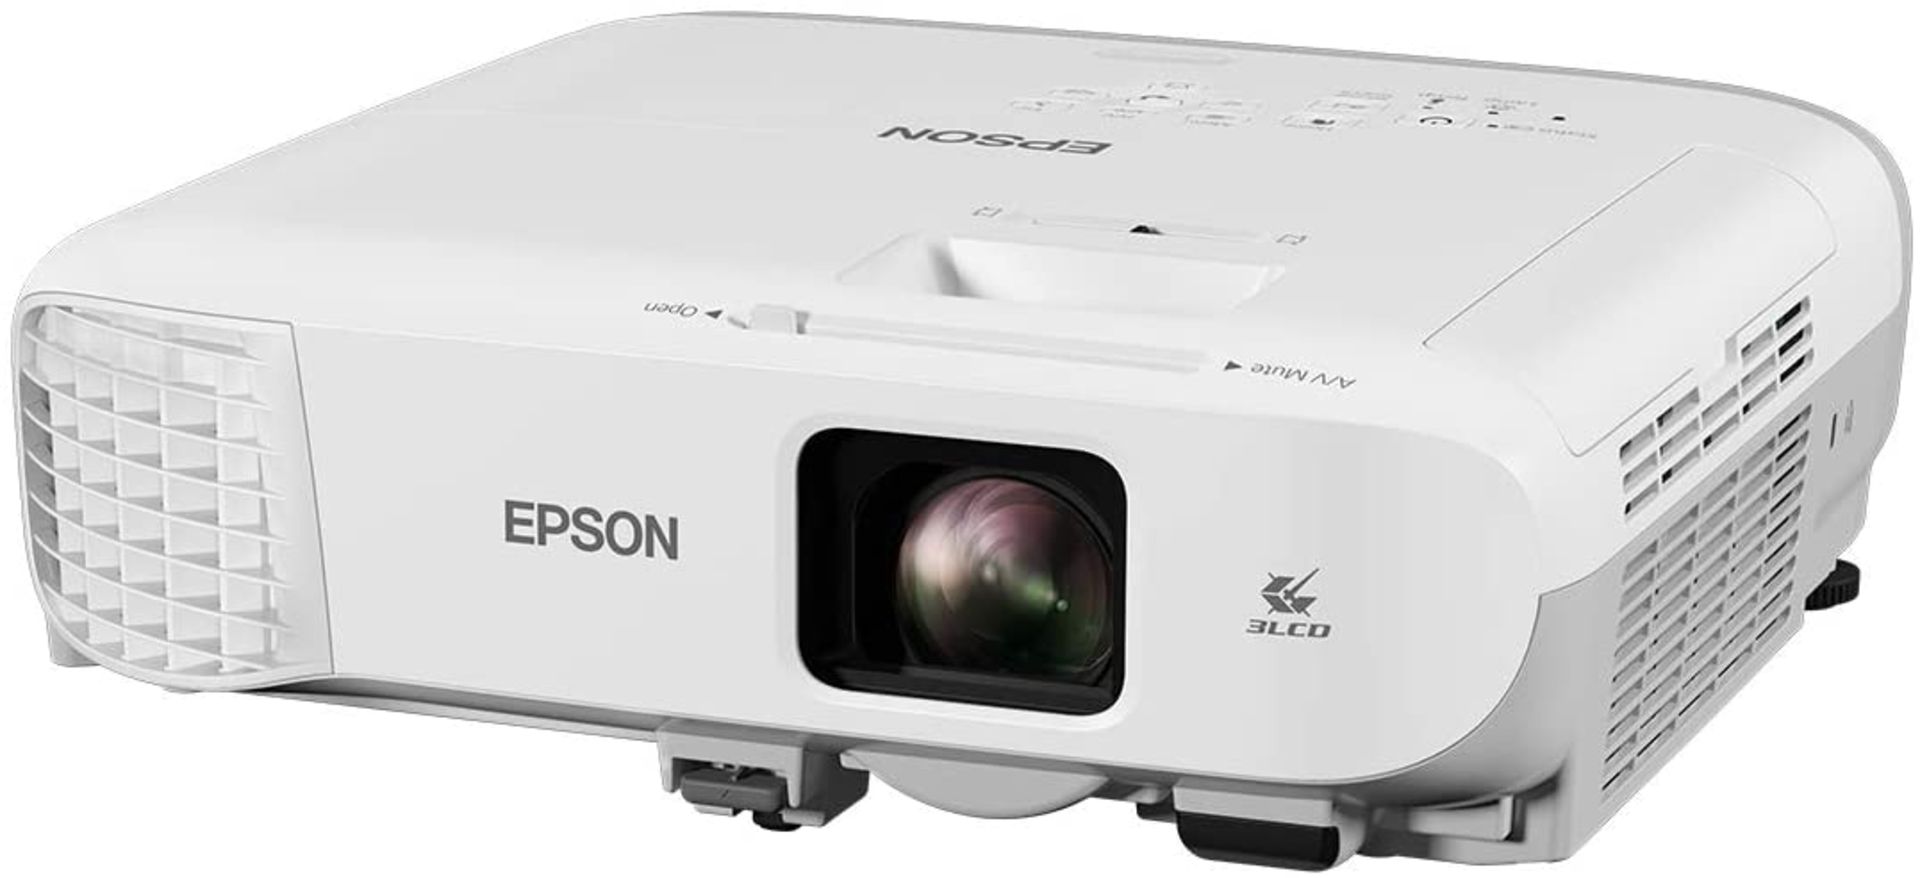 BRAND NEW EPSON EB-970 PROJECTOR RRP £690 S2